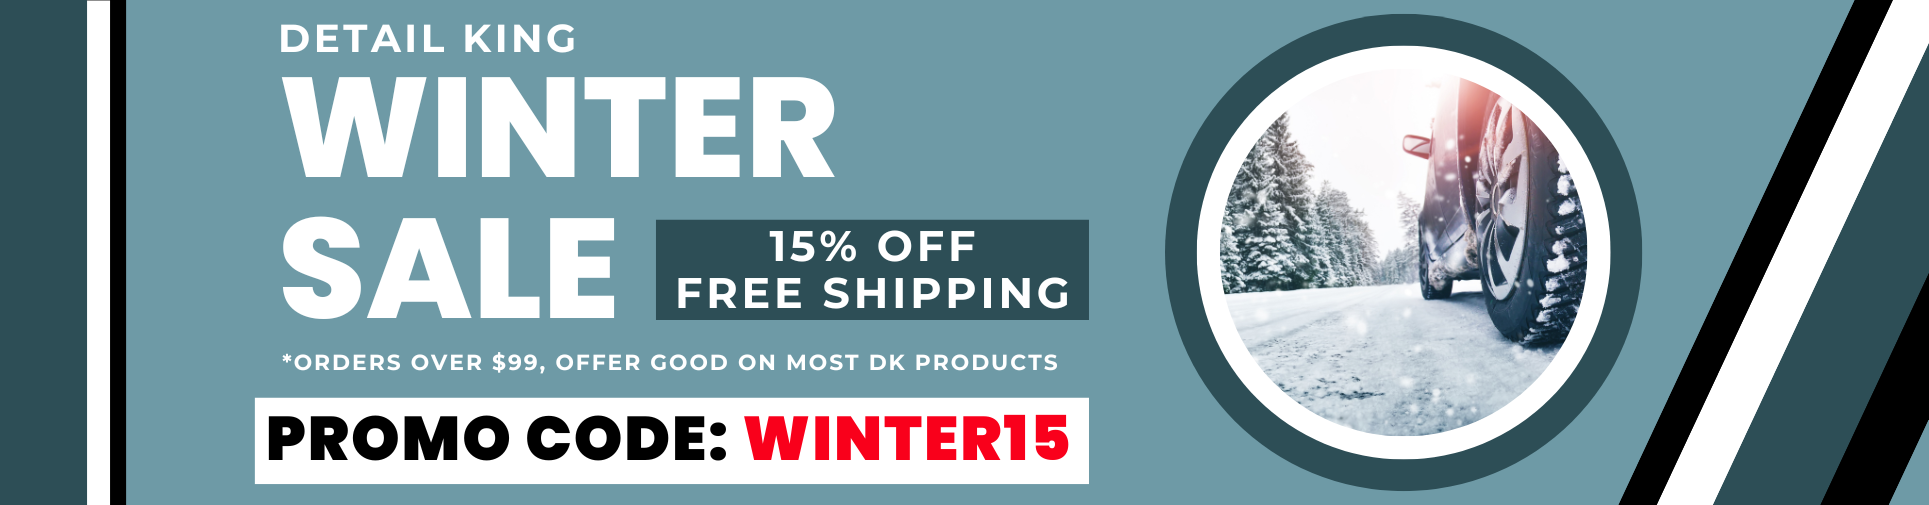 Winter Sale 15% Off & Free Shipping